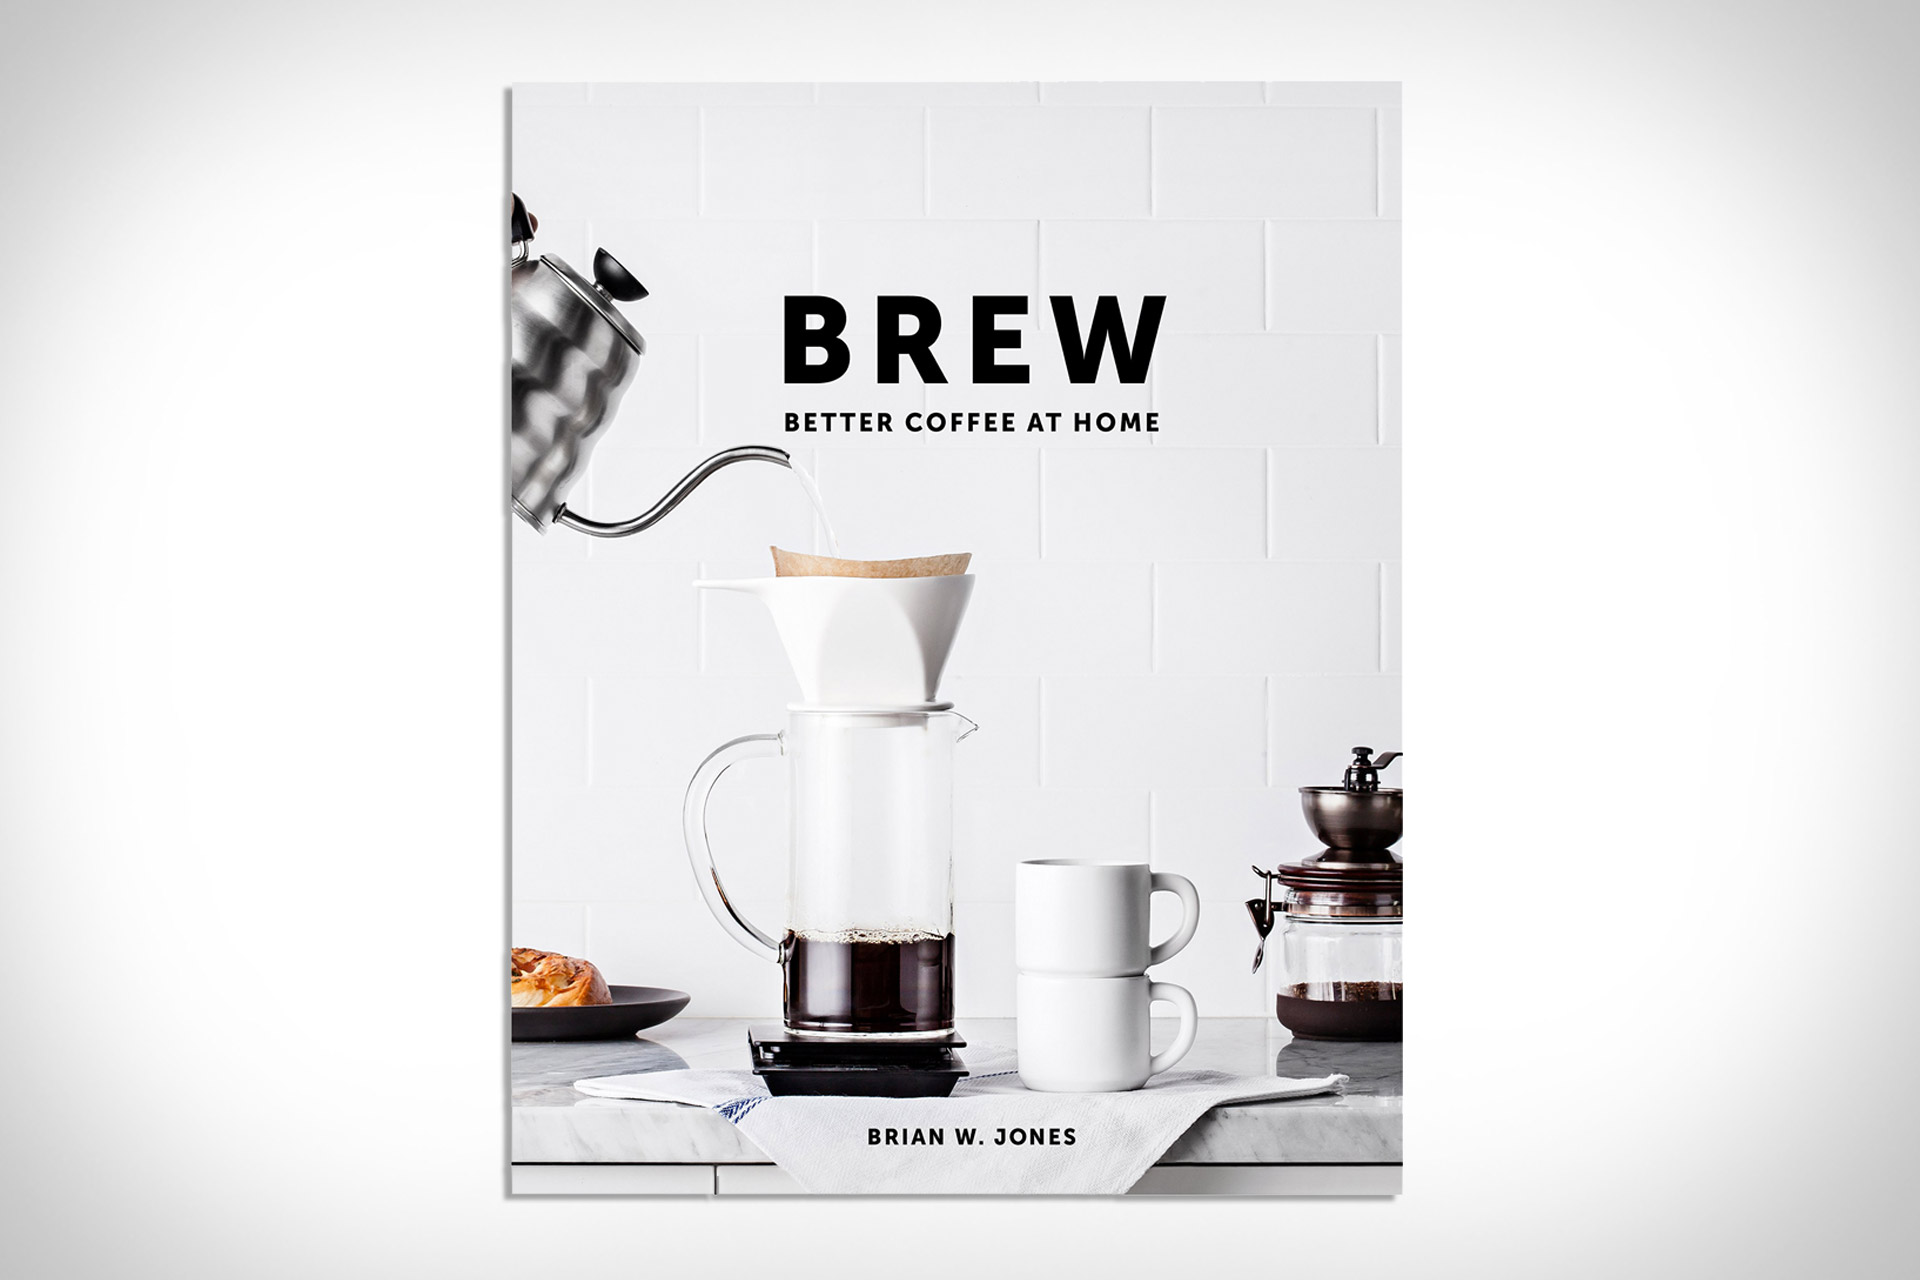 Brew: Better Coffee At Home